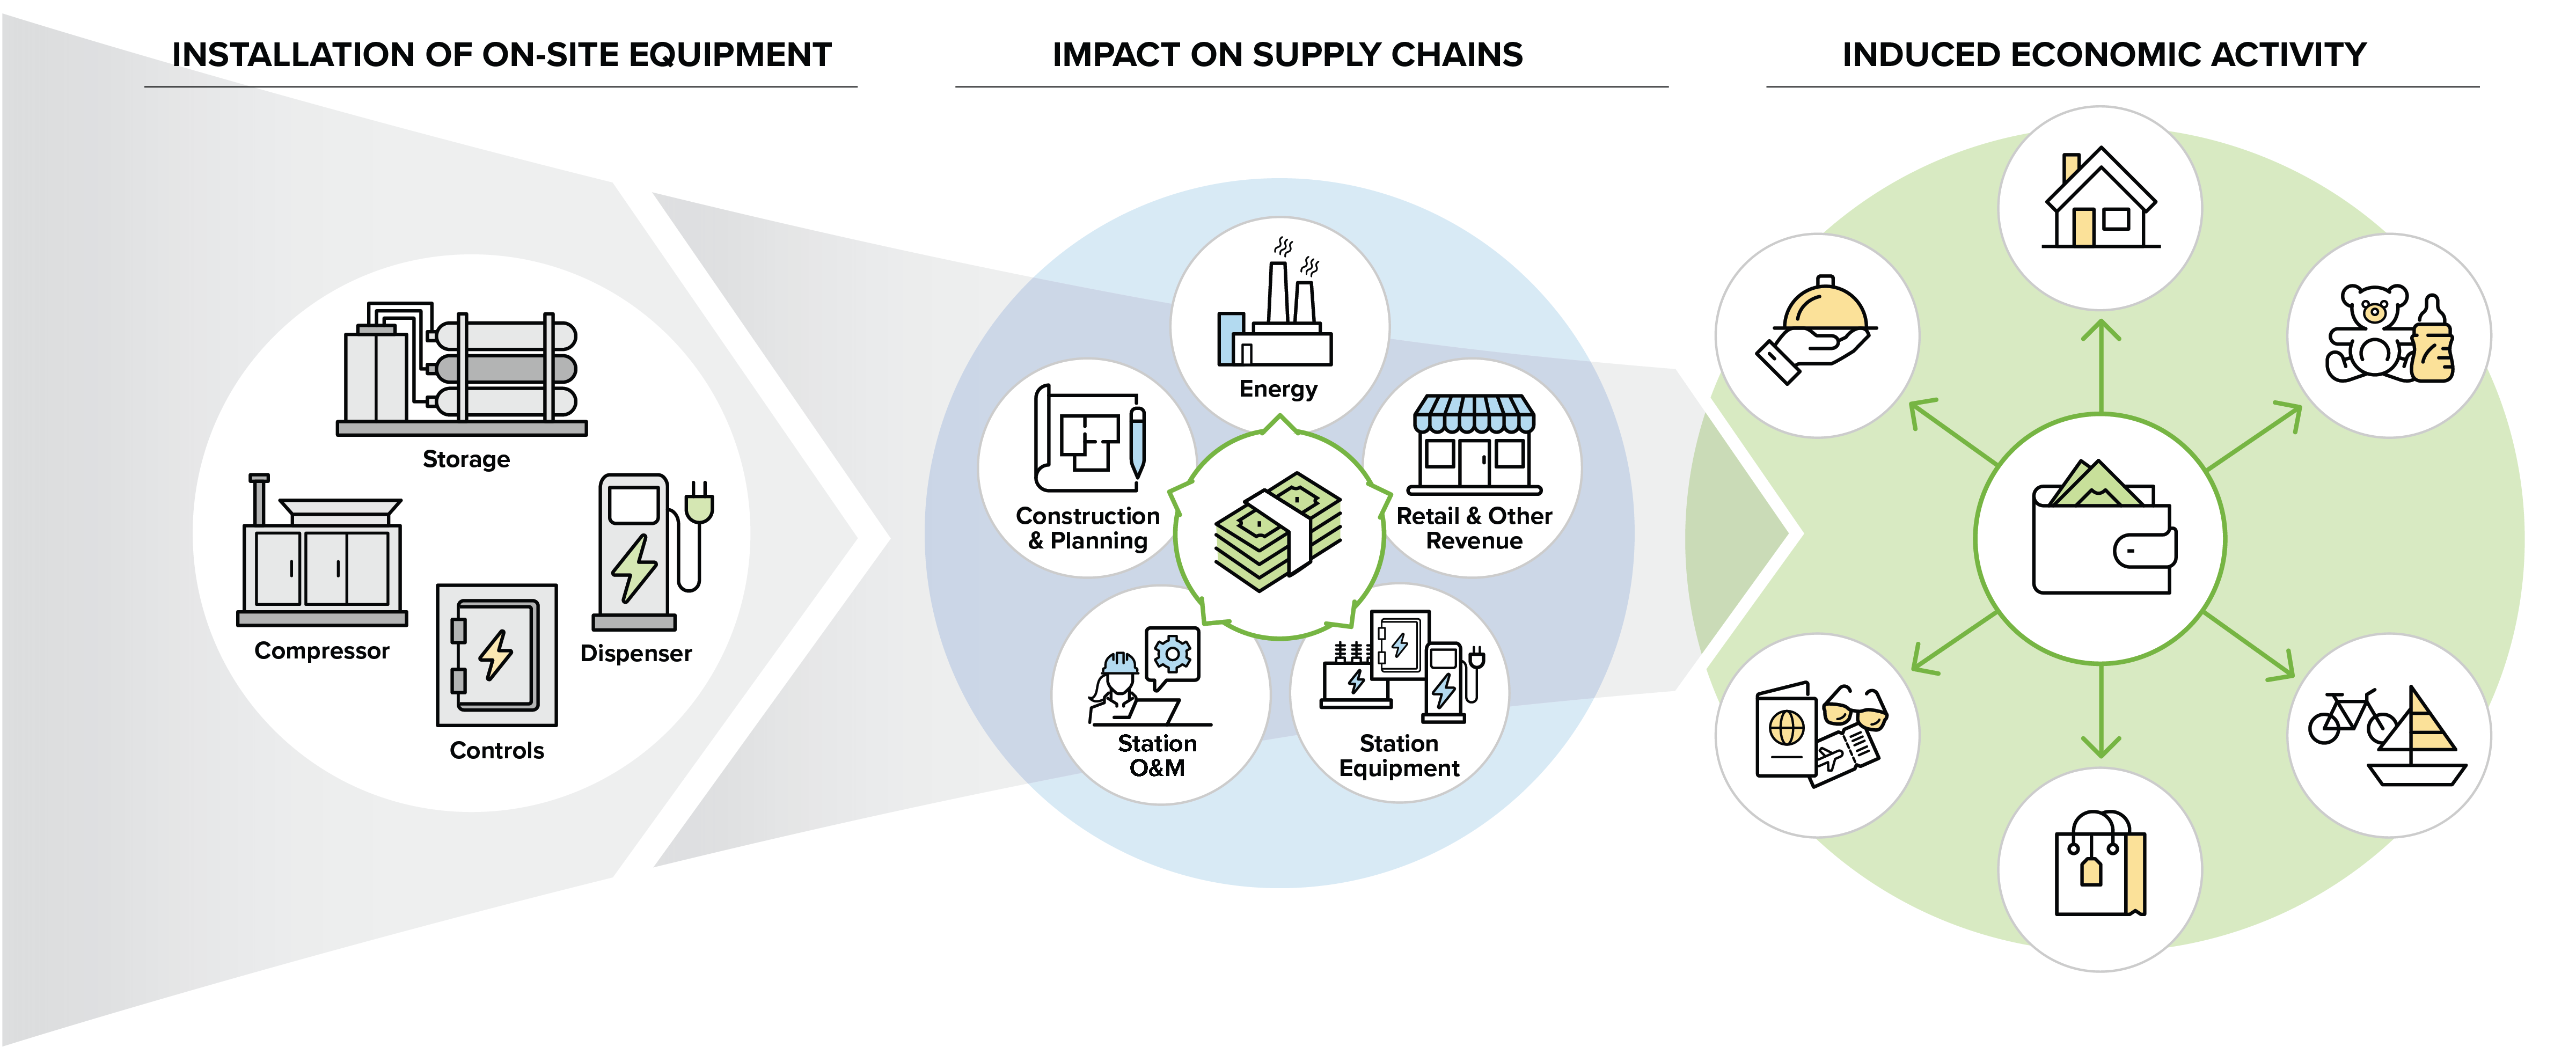 User flow of the JOBS Models moving from installation to supply chain impact to economic activity.